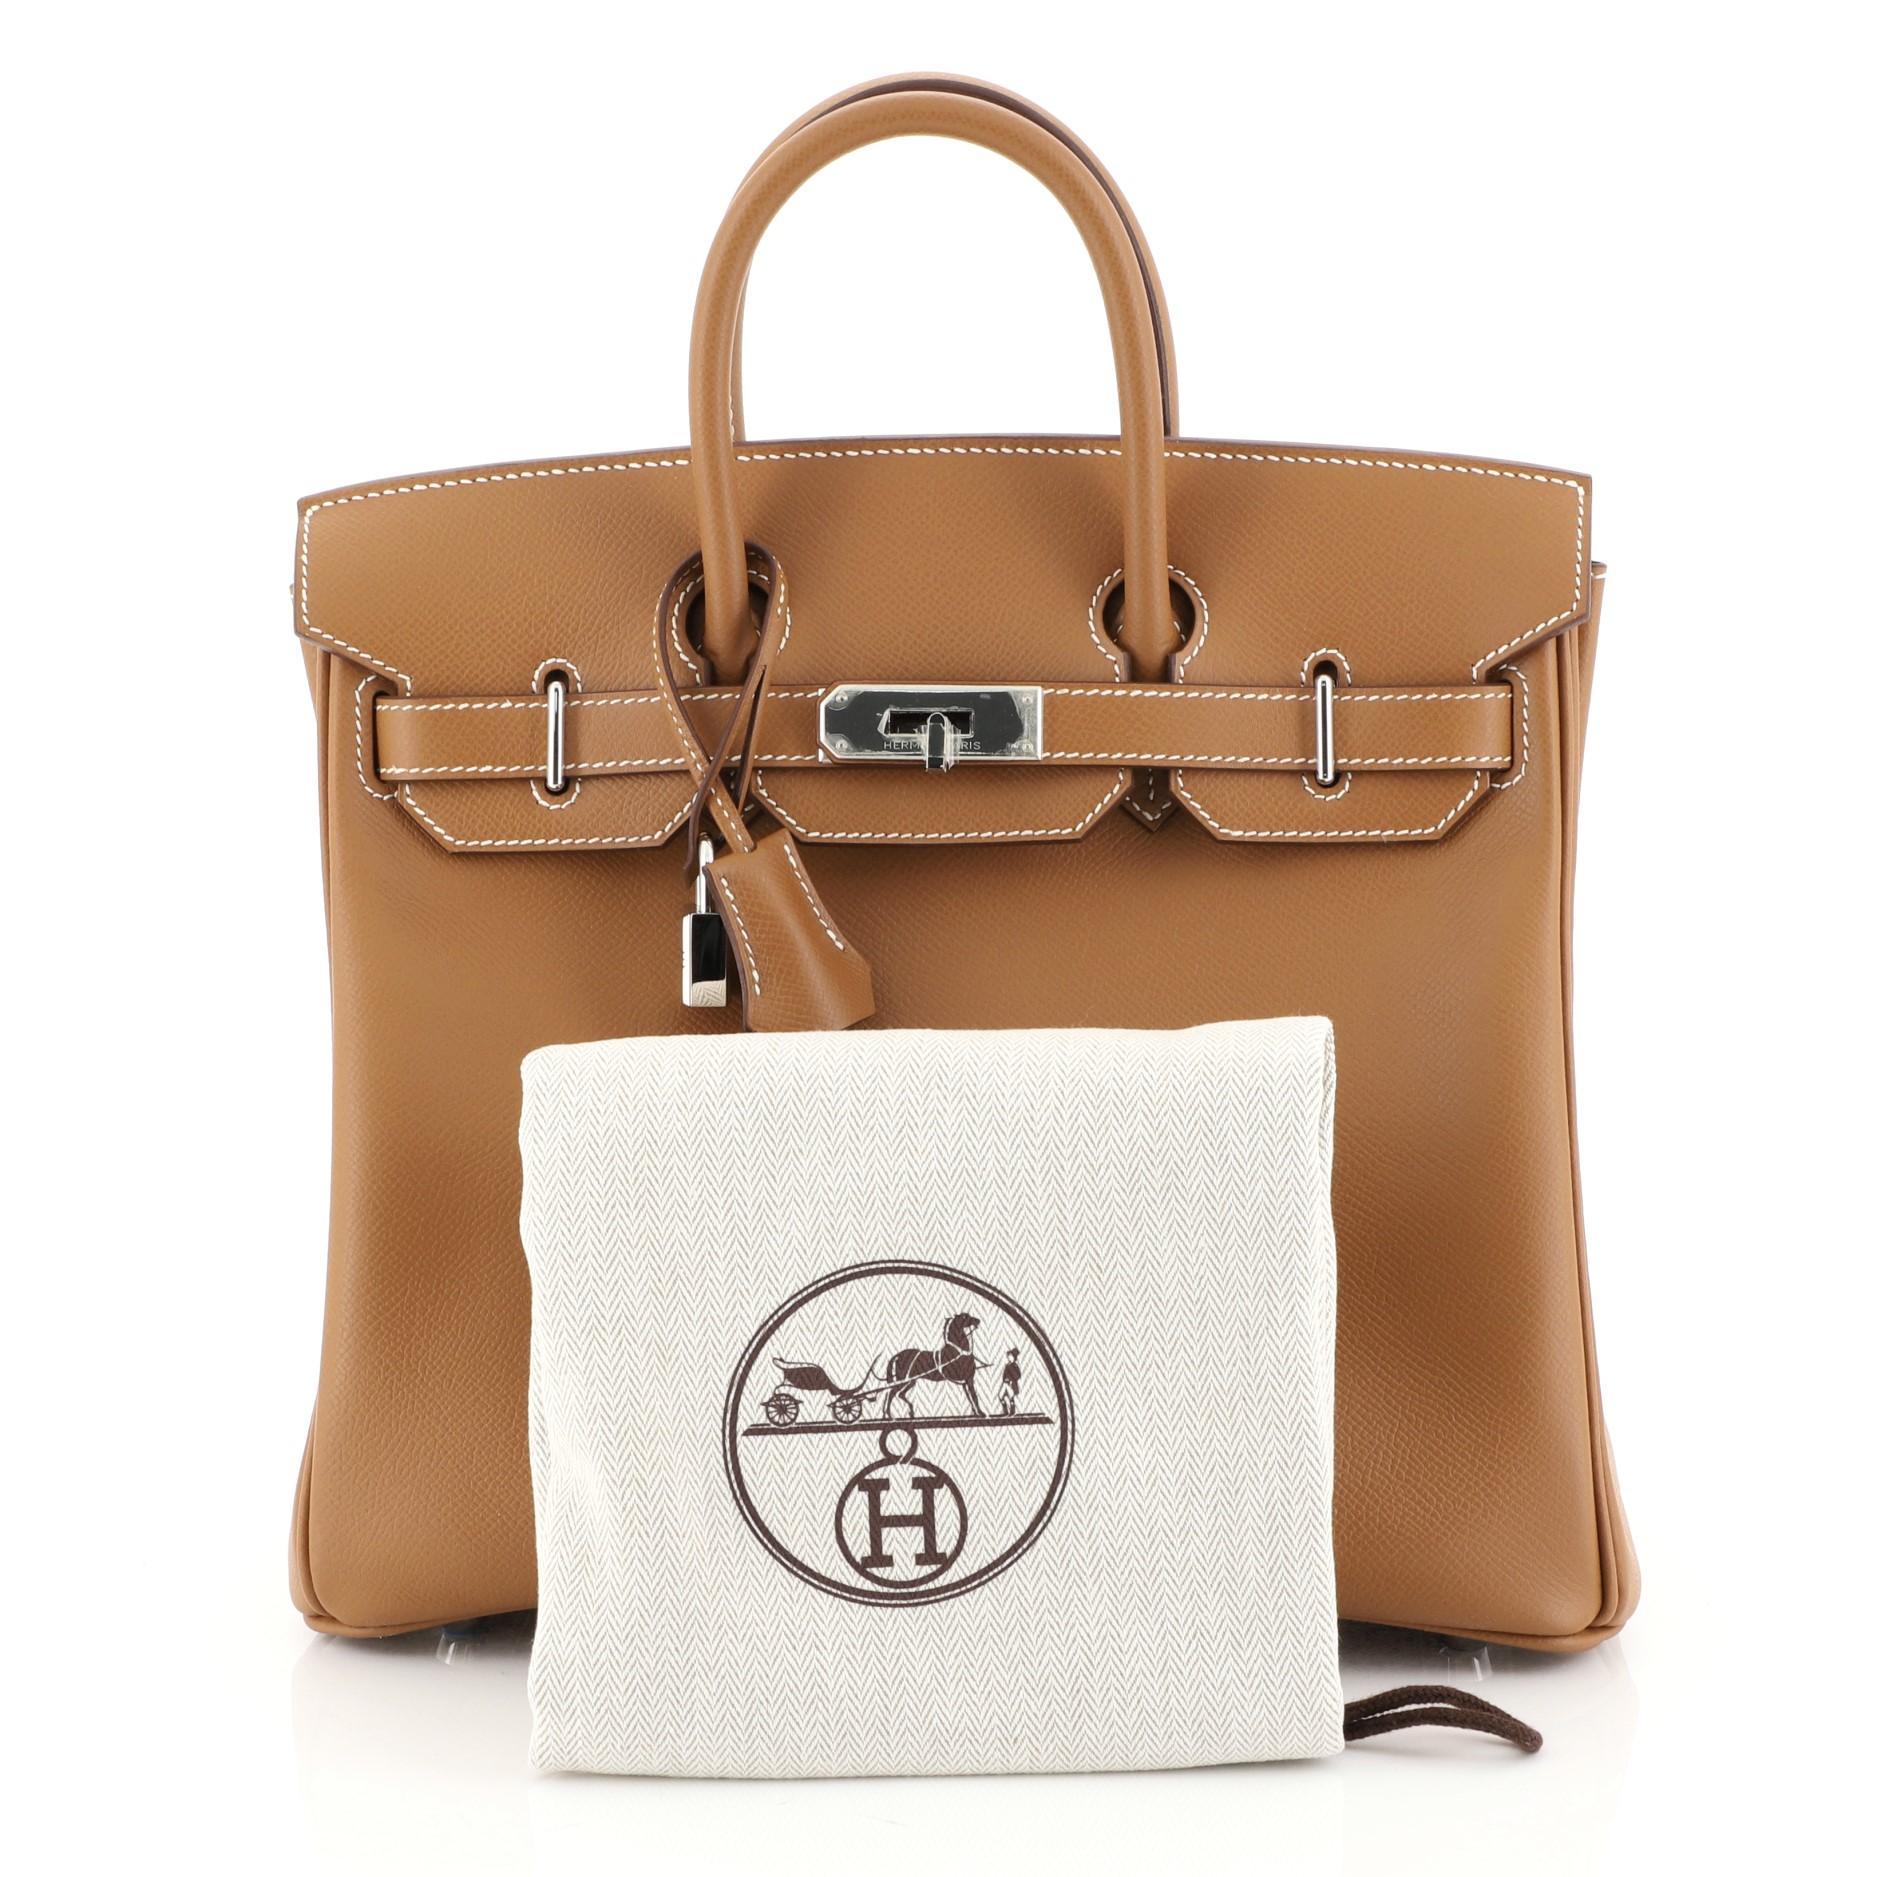 This Hermes HAC Birkin Bag Gold Epsom with Palladium Hardware 28, crafted in Gold brown Epsom leather, features dual rolled handles, front flap, and palladium hardware. Its turn-lock closure opens to a Gold brown Epsom leather interior with zip and